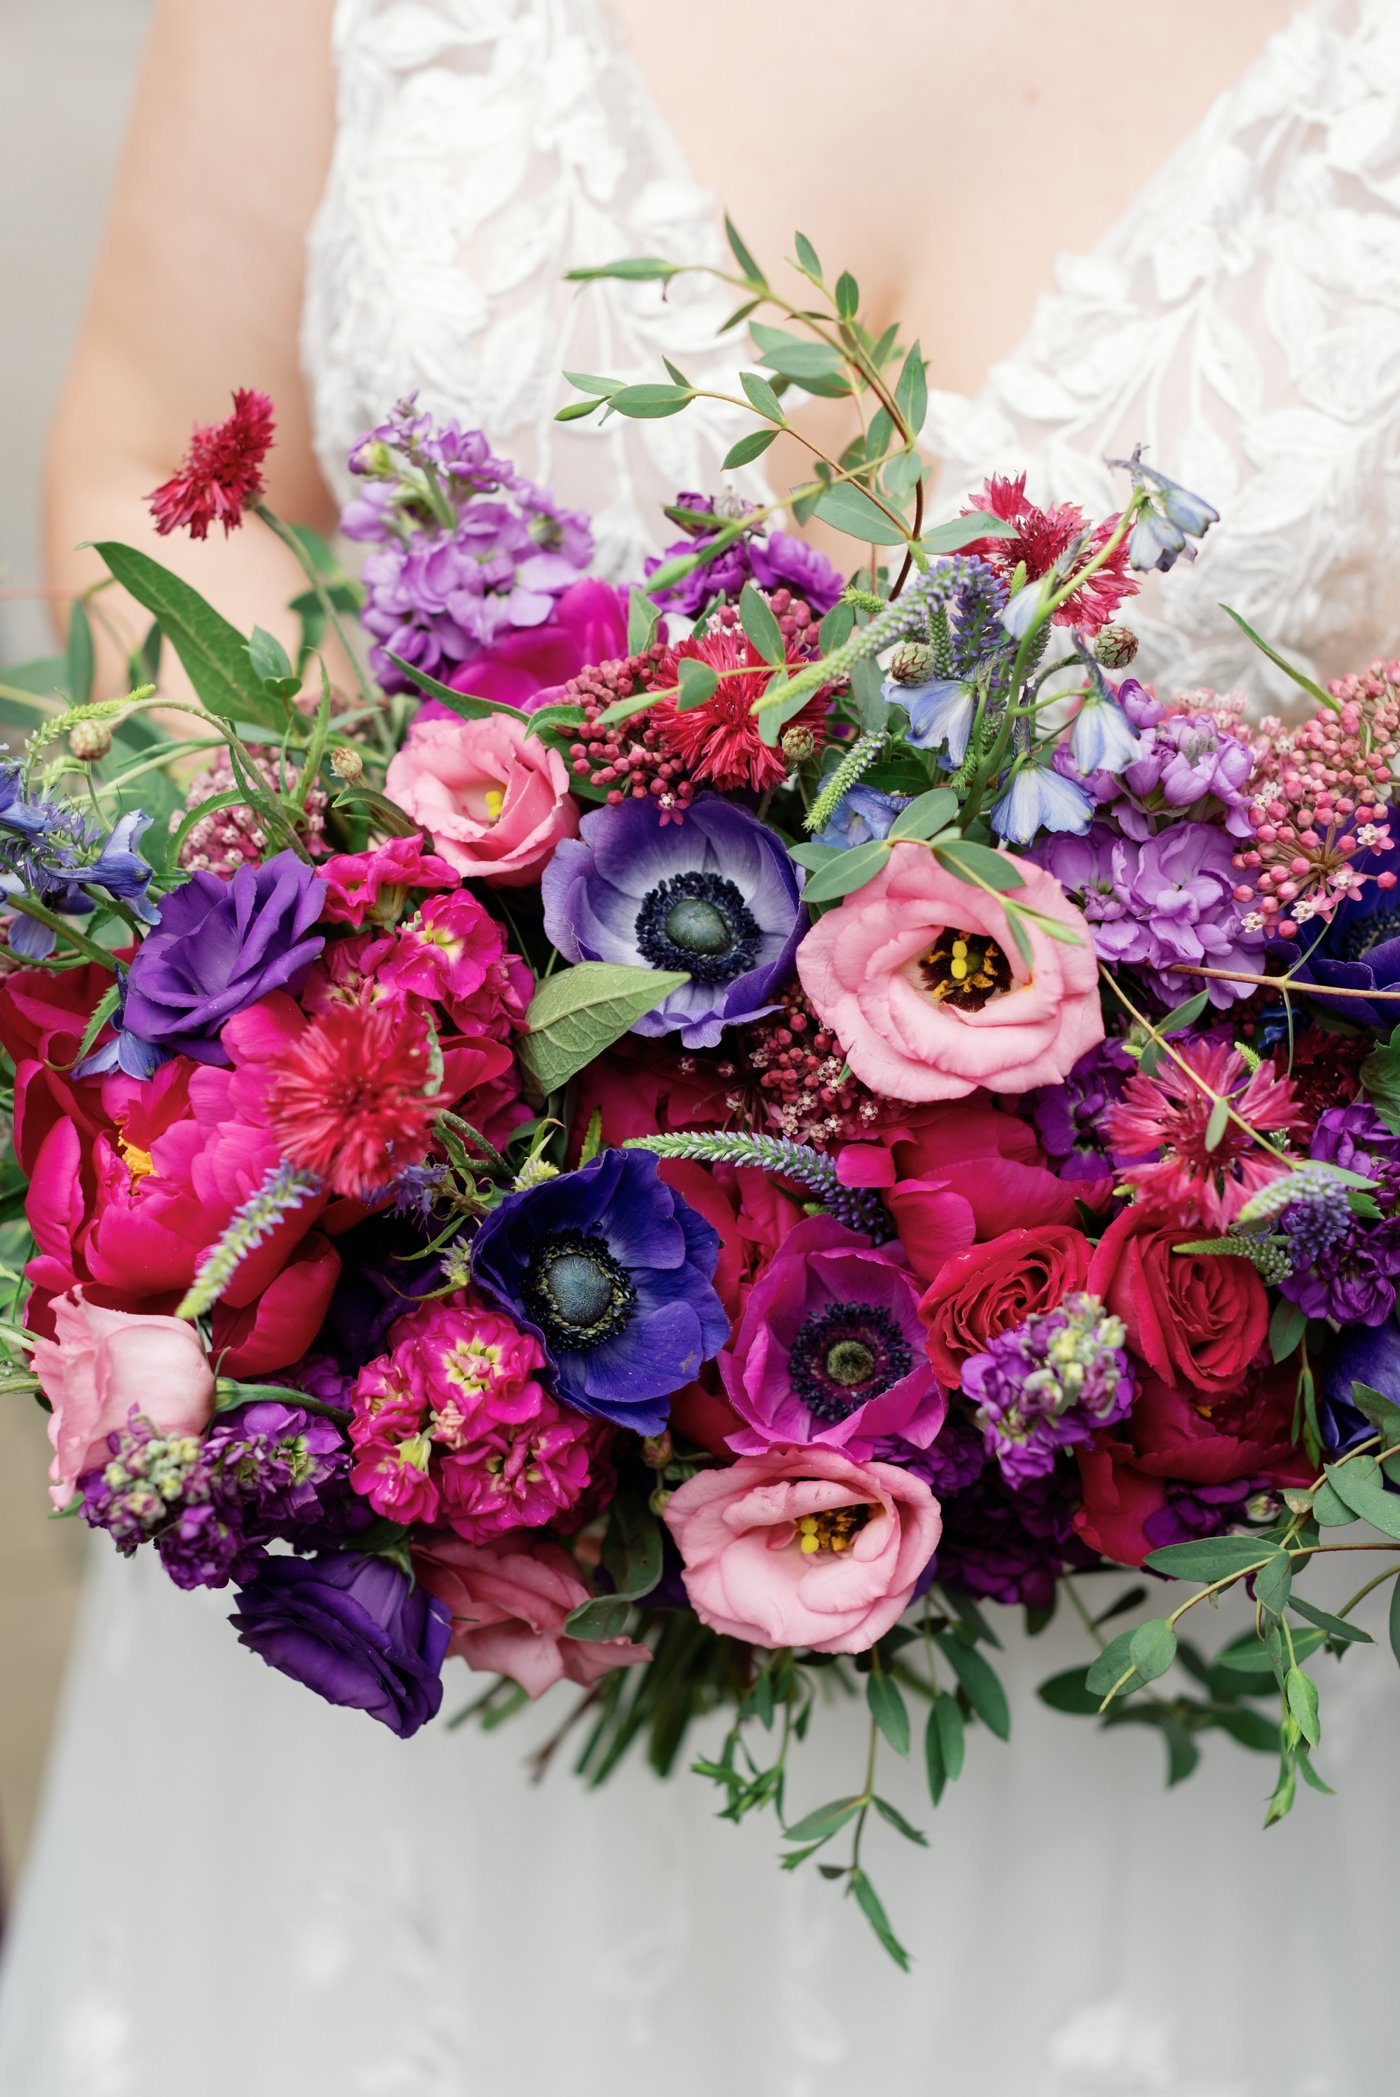 Purple and pink bridal bouquet filled with anemones, roses, and delphinium